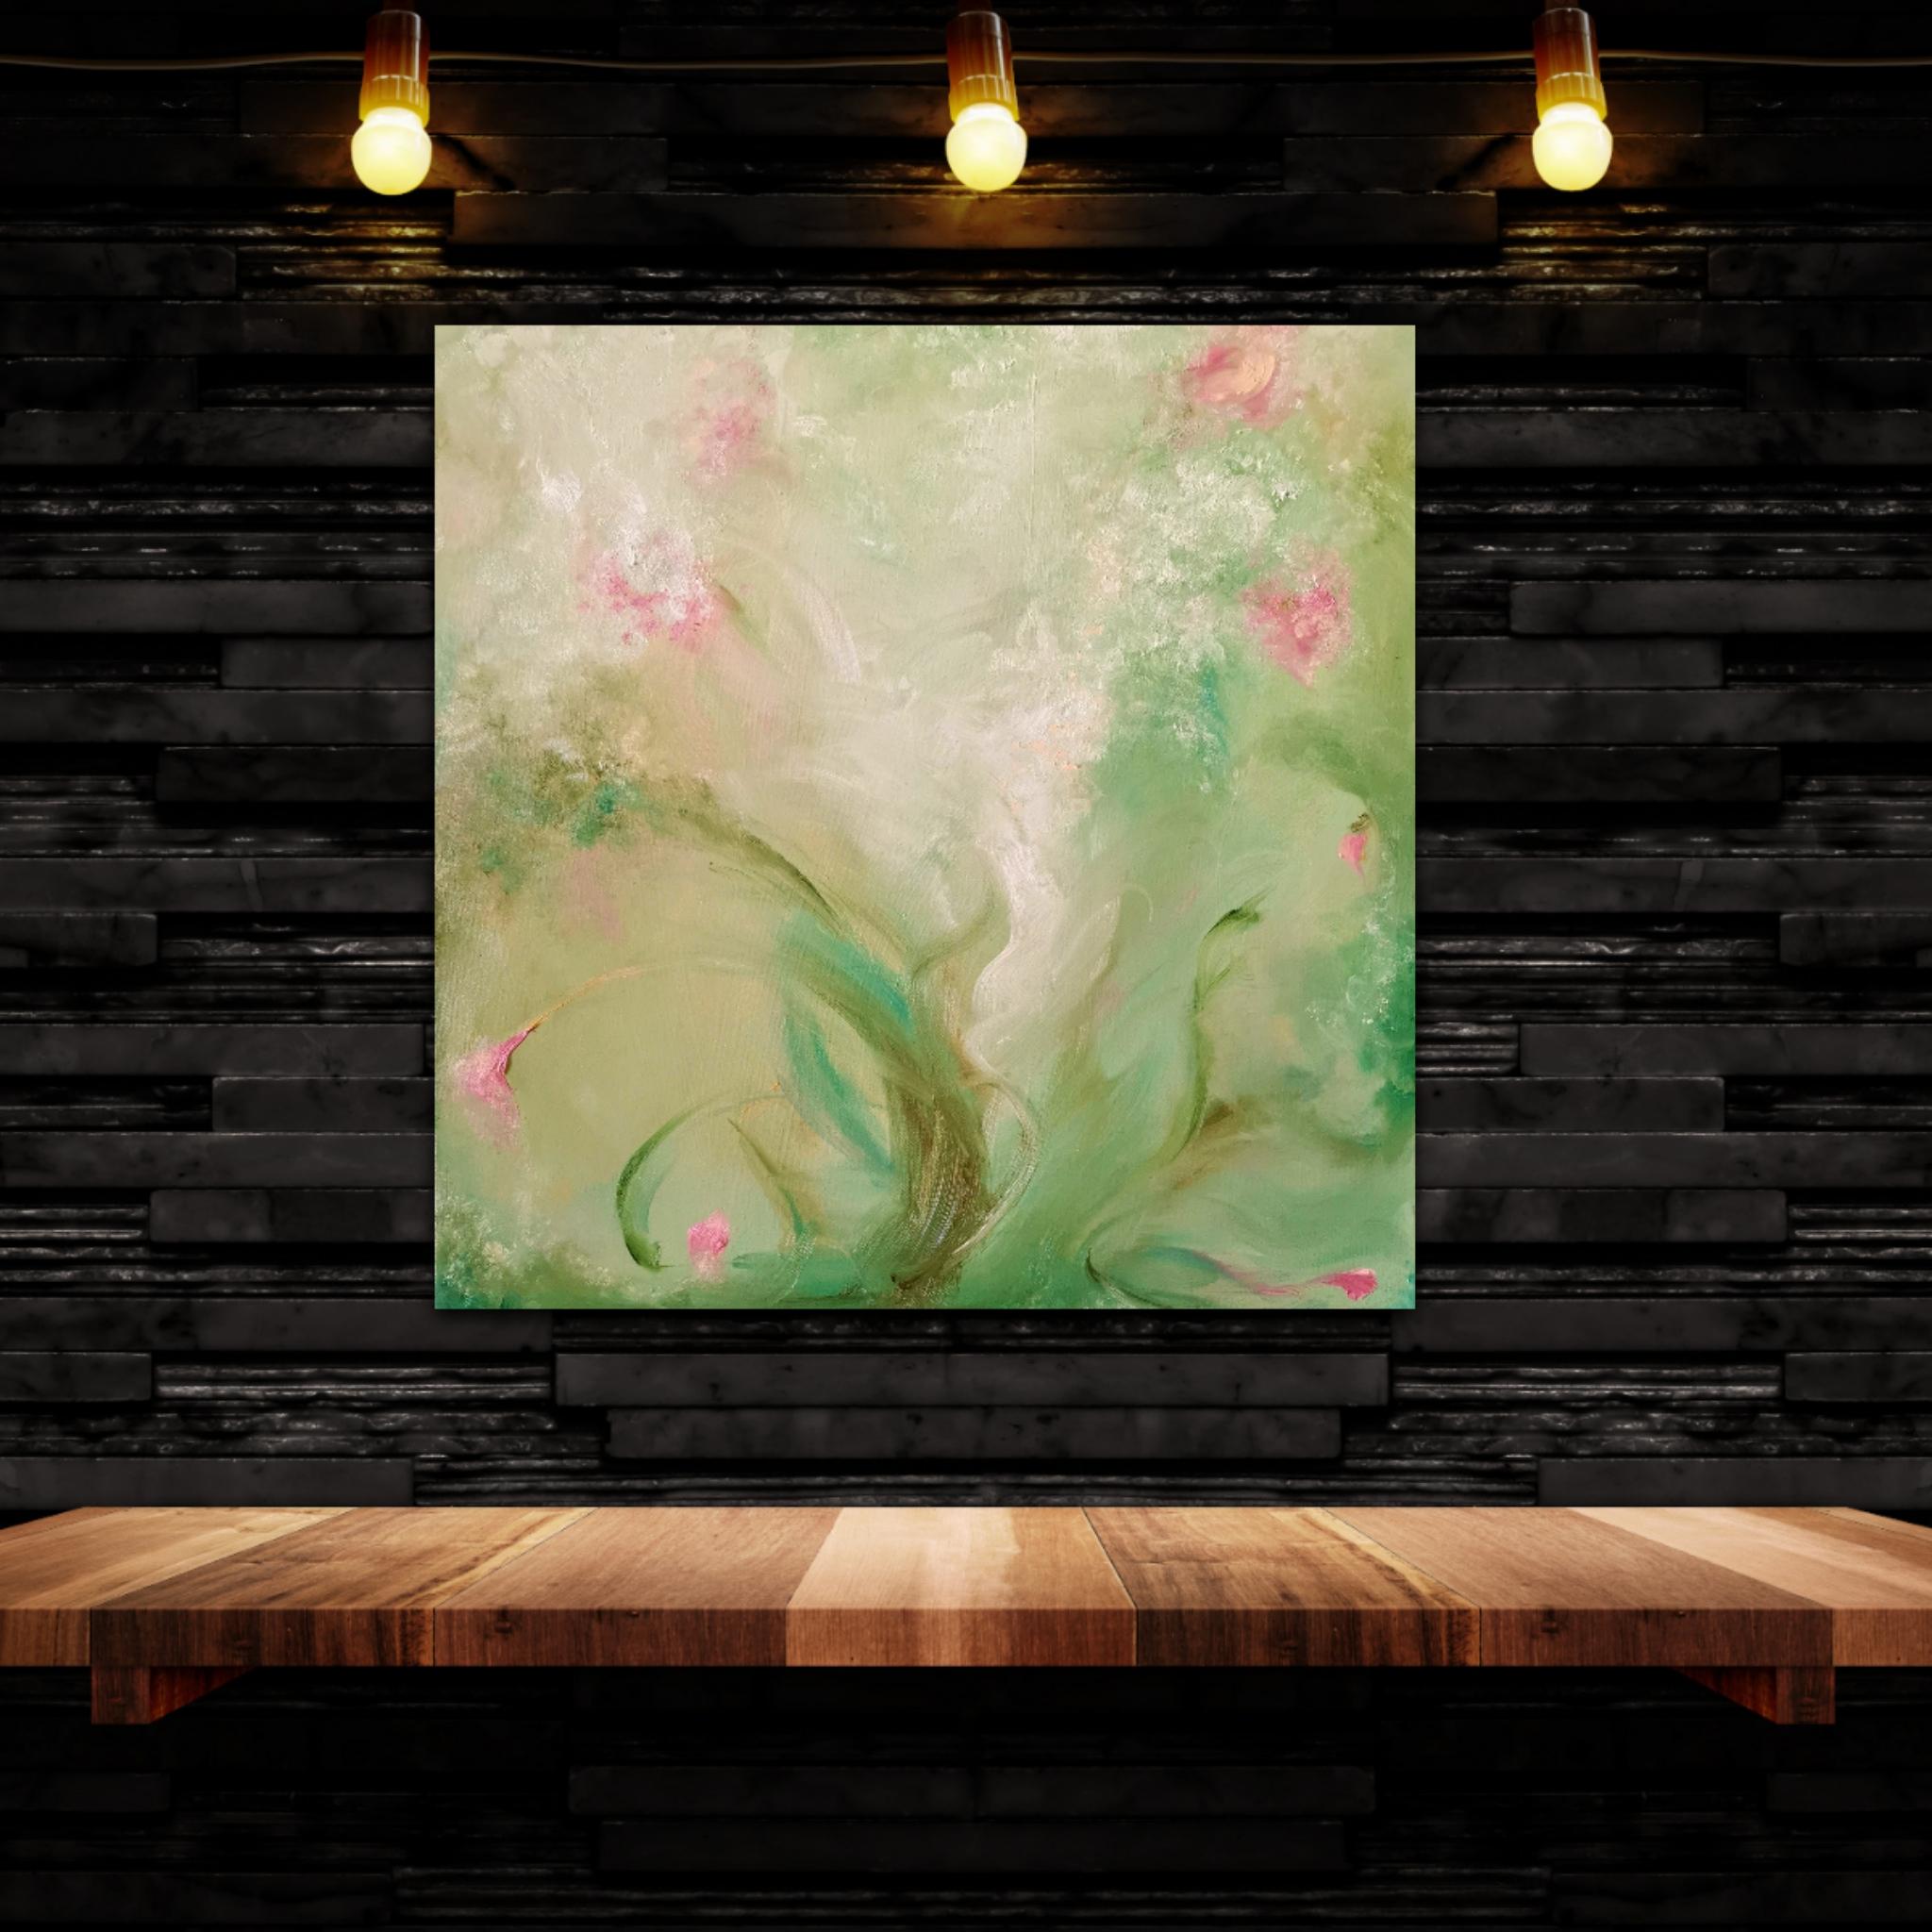 A most verdant spring - Whimsical green and pink abstract painting 2